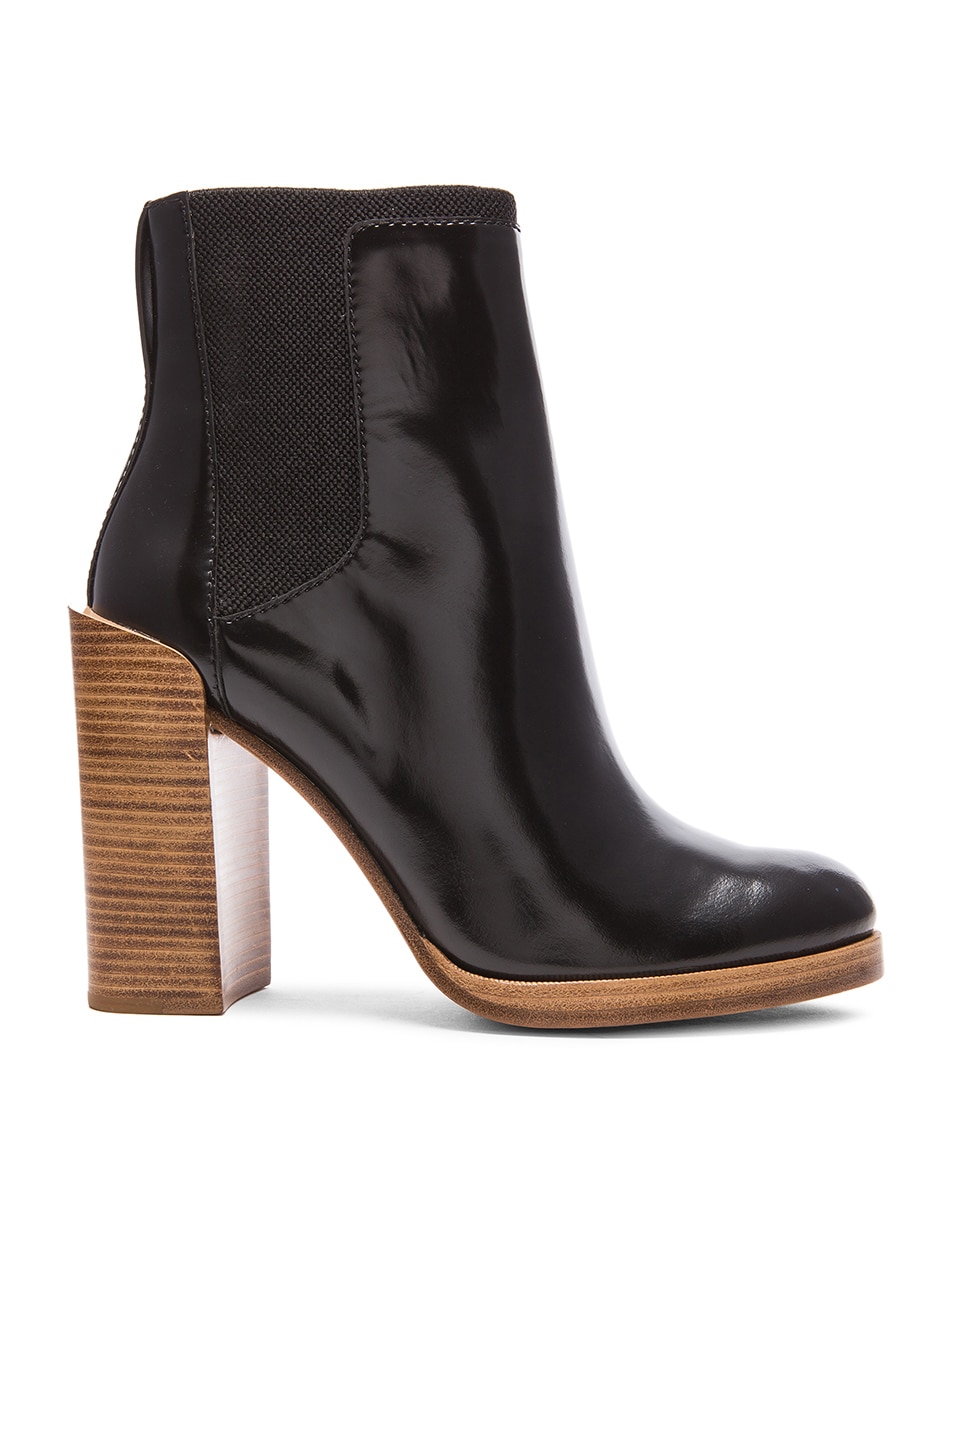 Image 1 of 3.1 phillip lim Emerson Short Chelsea Leather Boots in Black